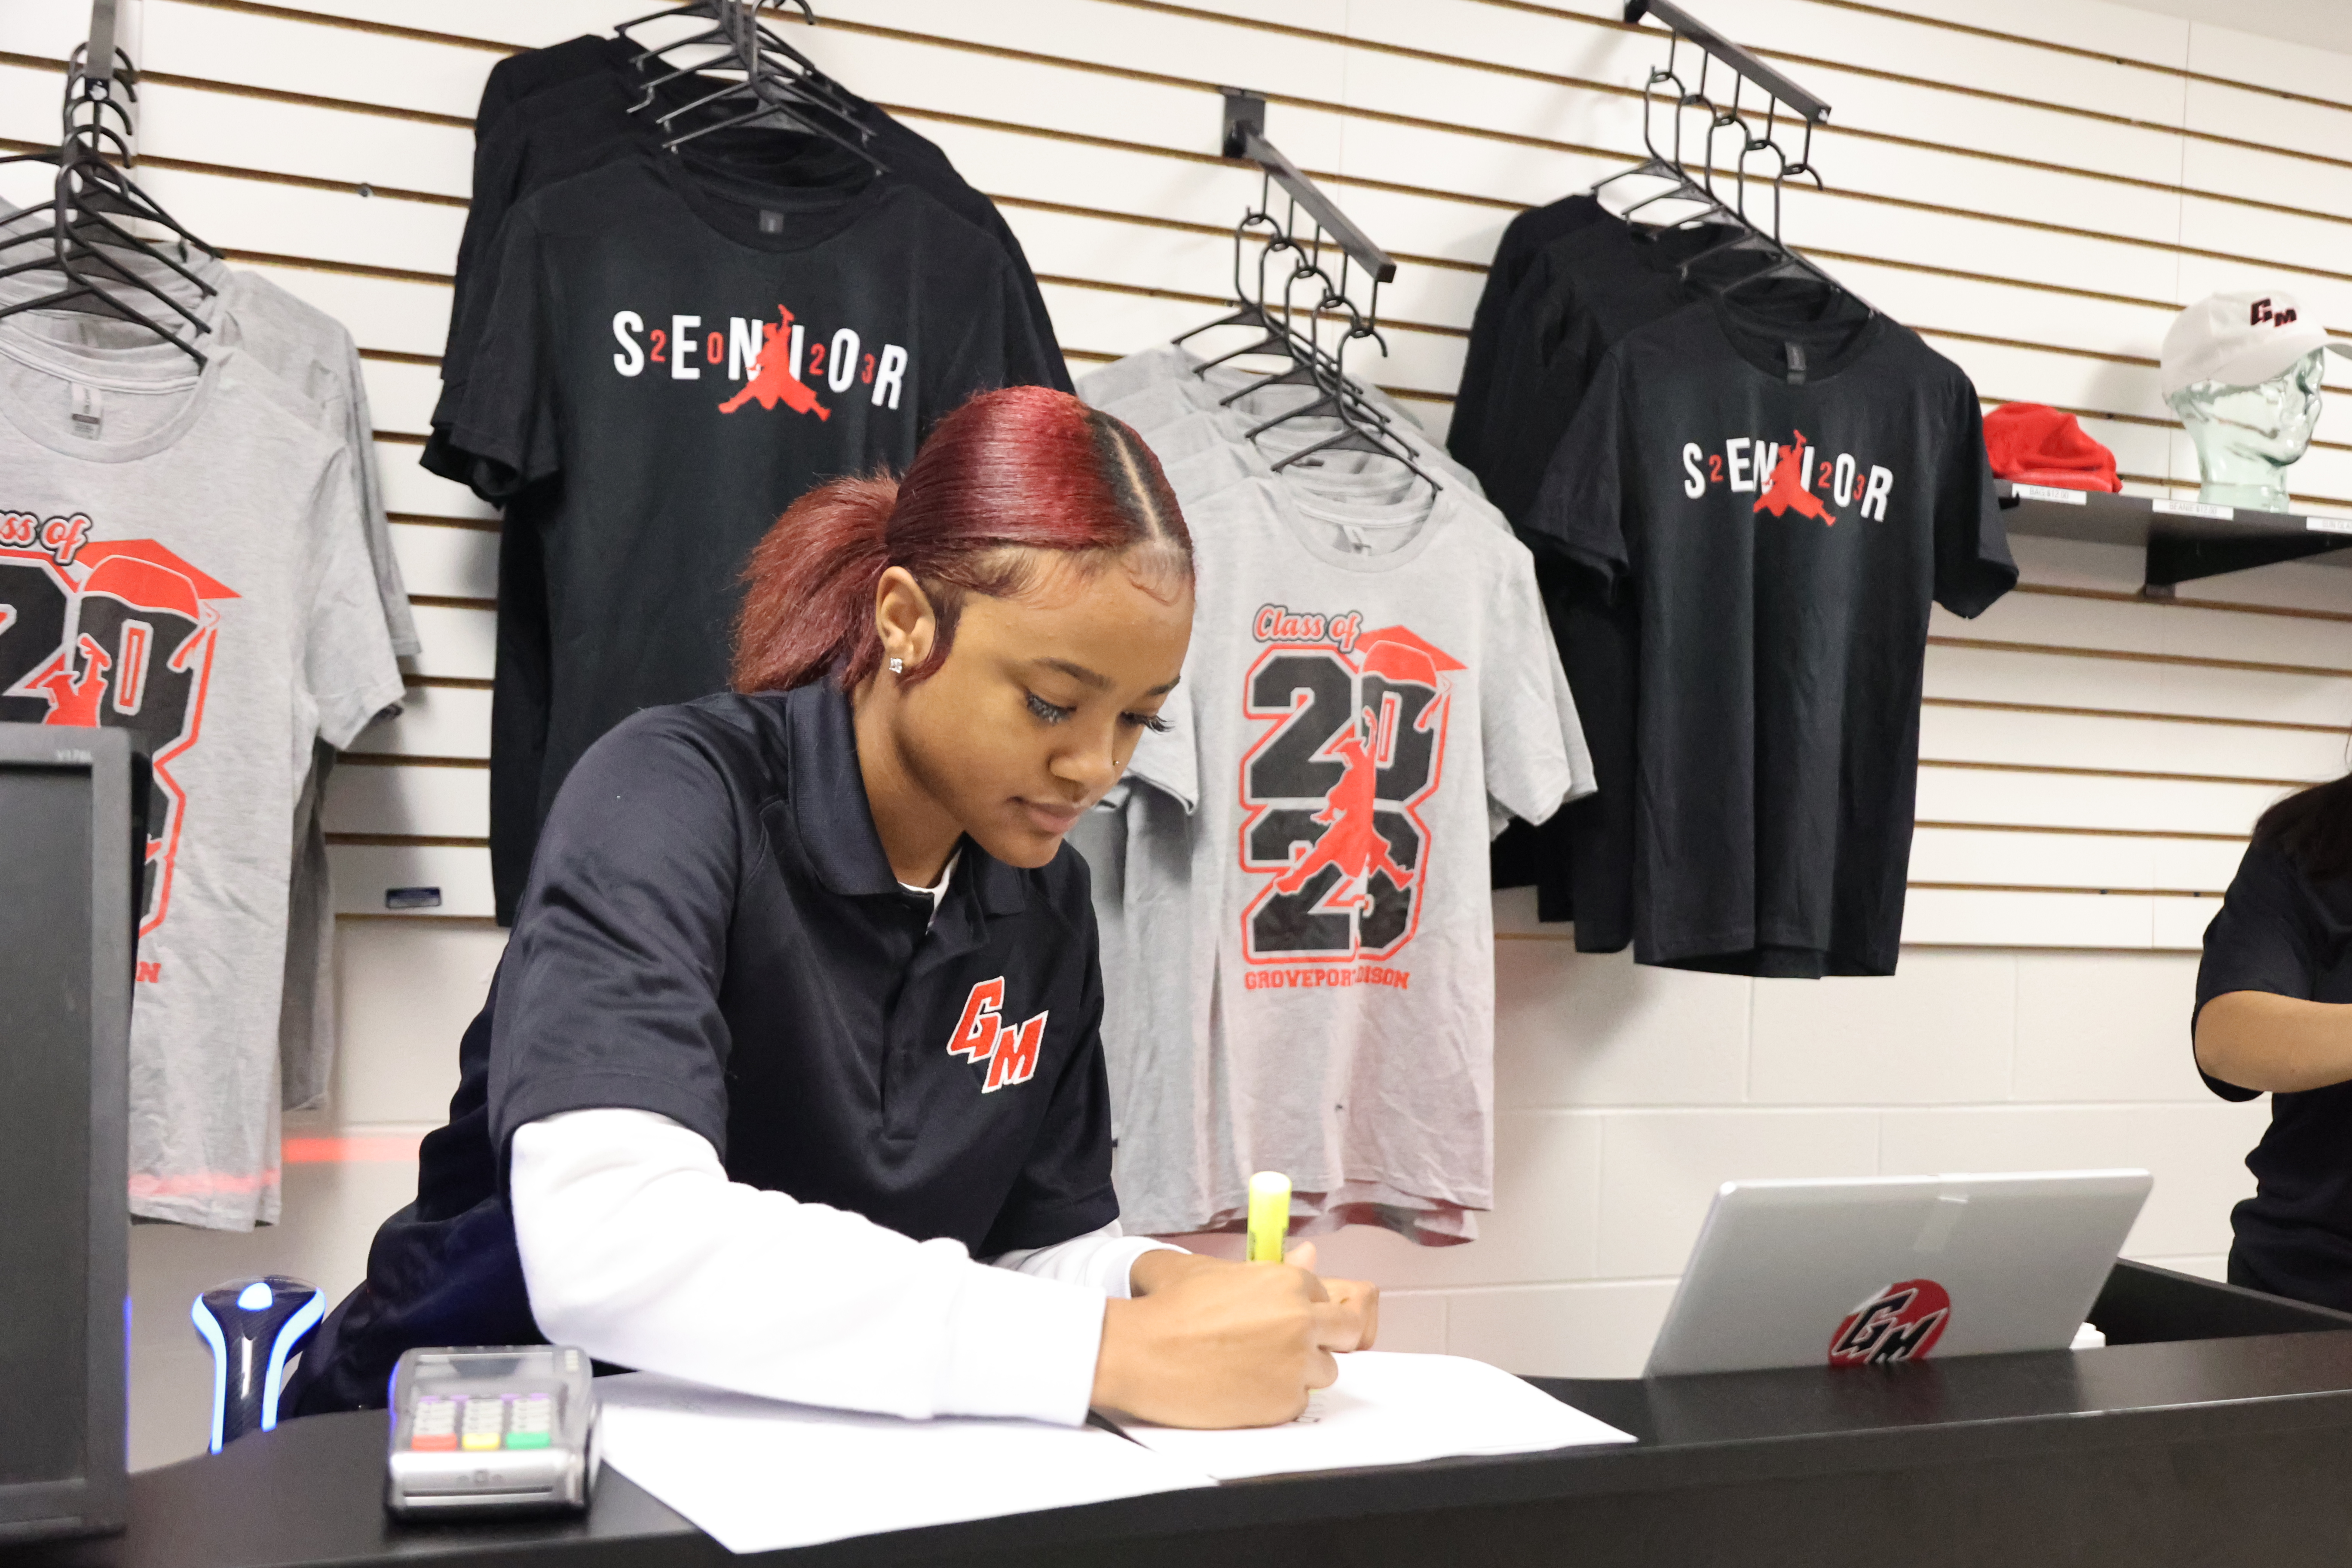 A Black, female is doing paperwork near a cash register and in front of t-shirts hanging on the wall.